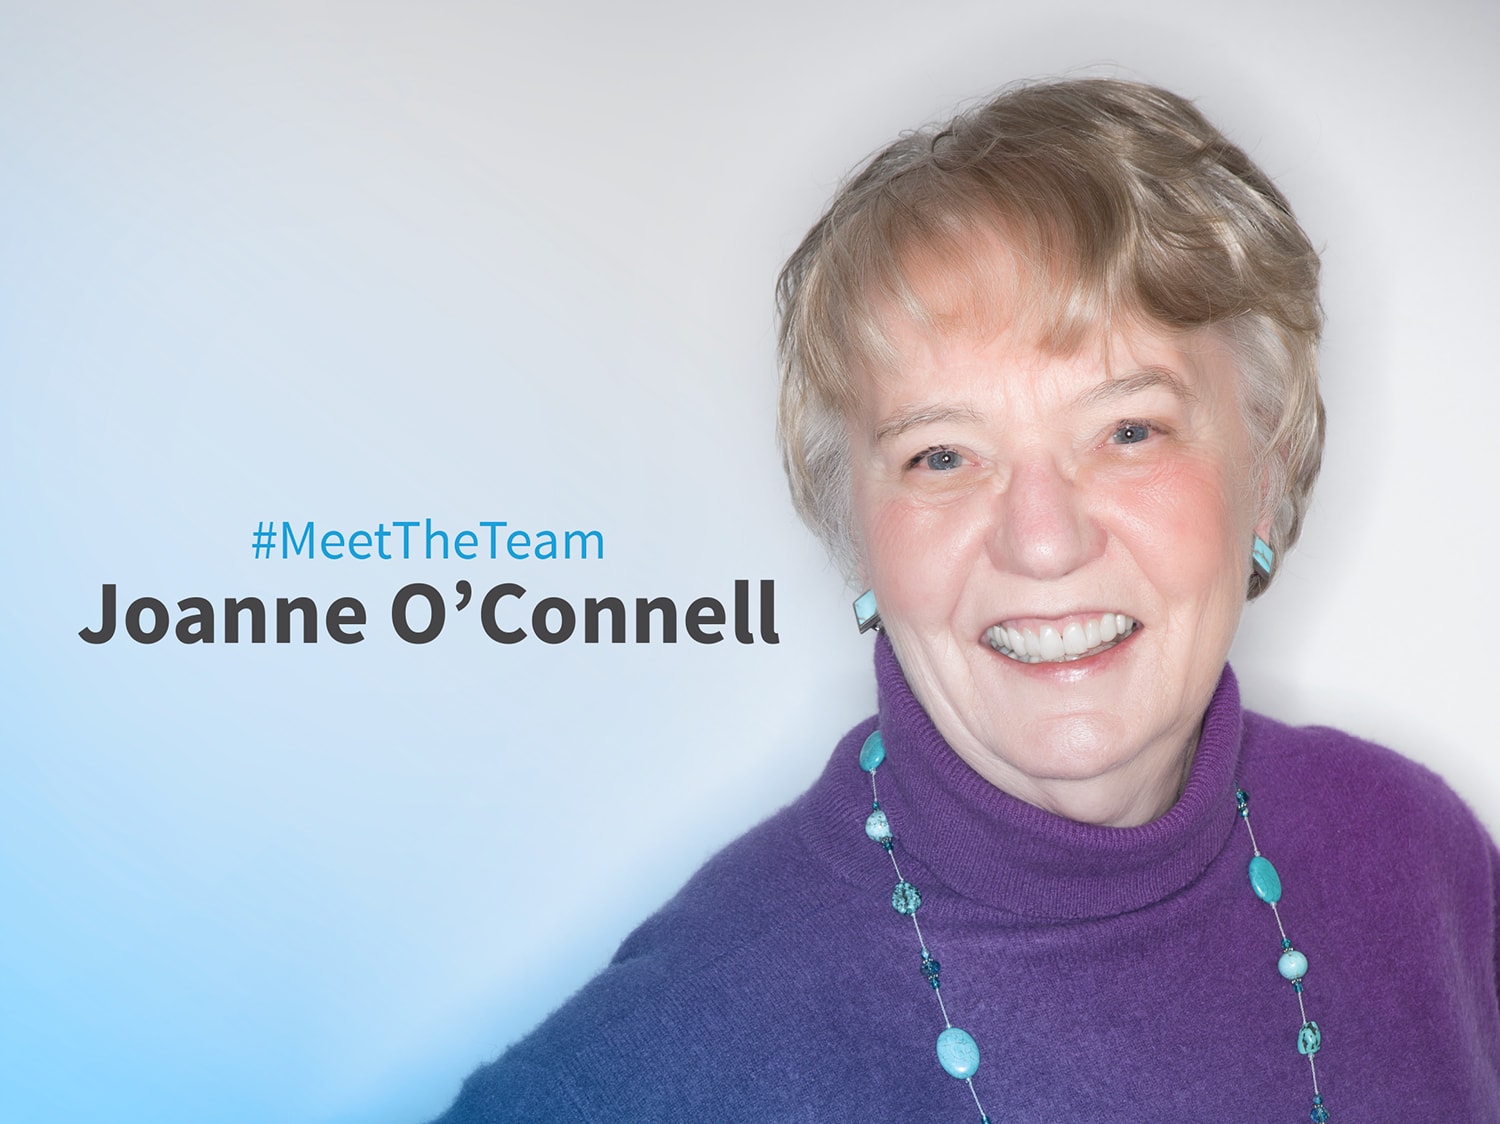 Joanne O'Connell